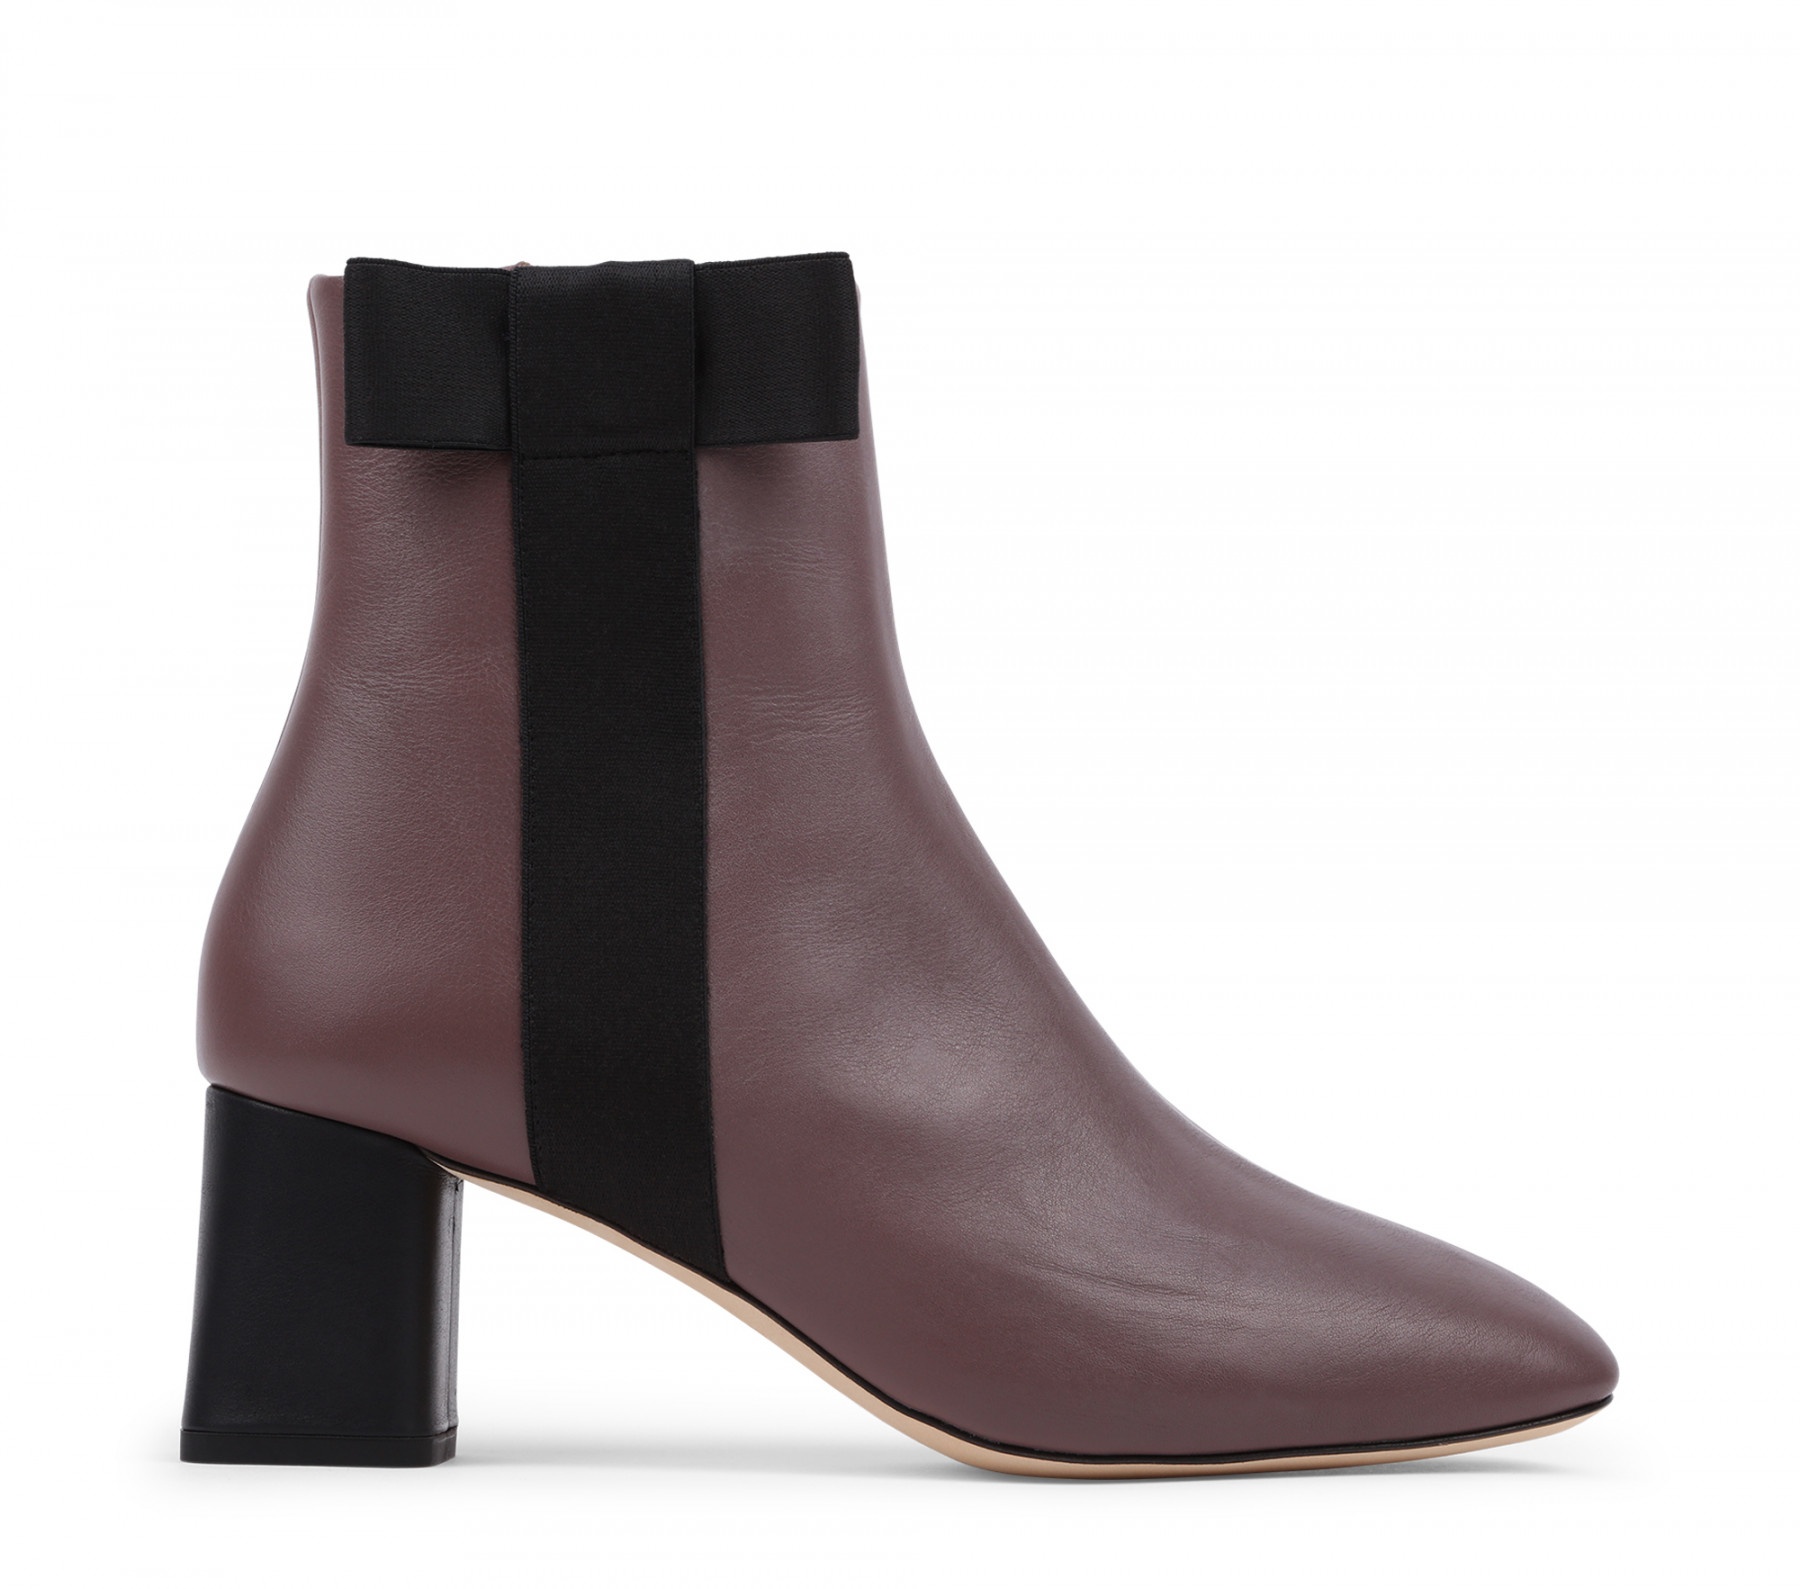 Soho ankle boots - 1